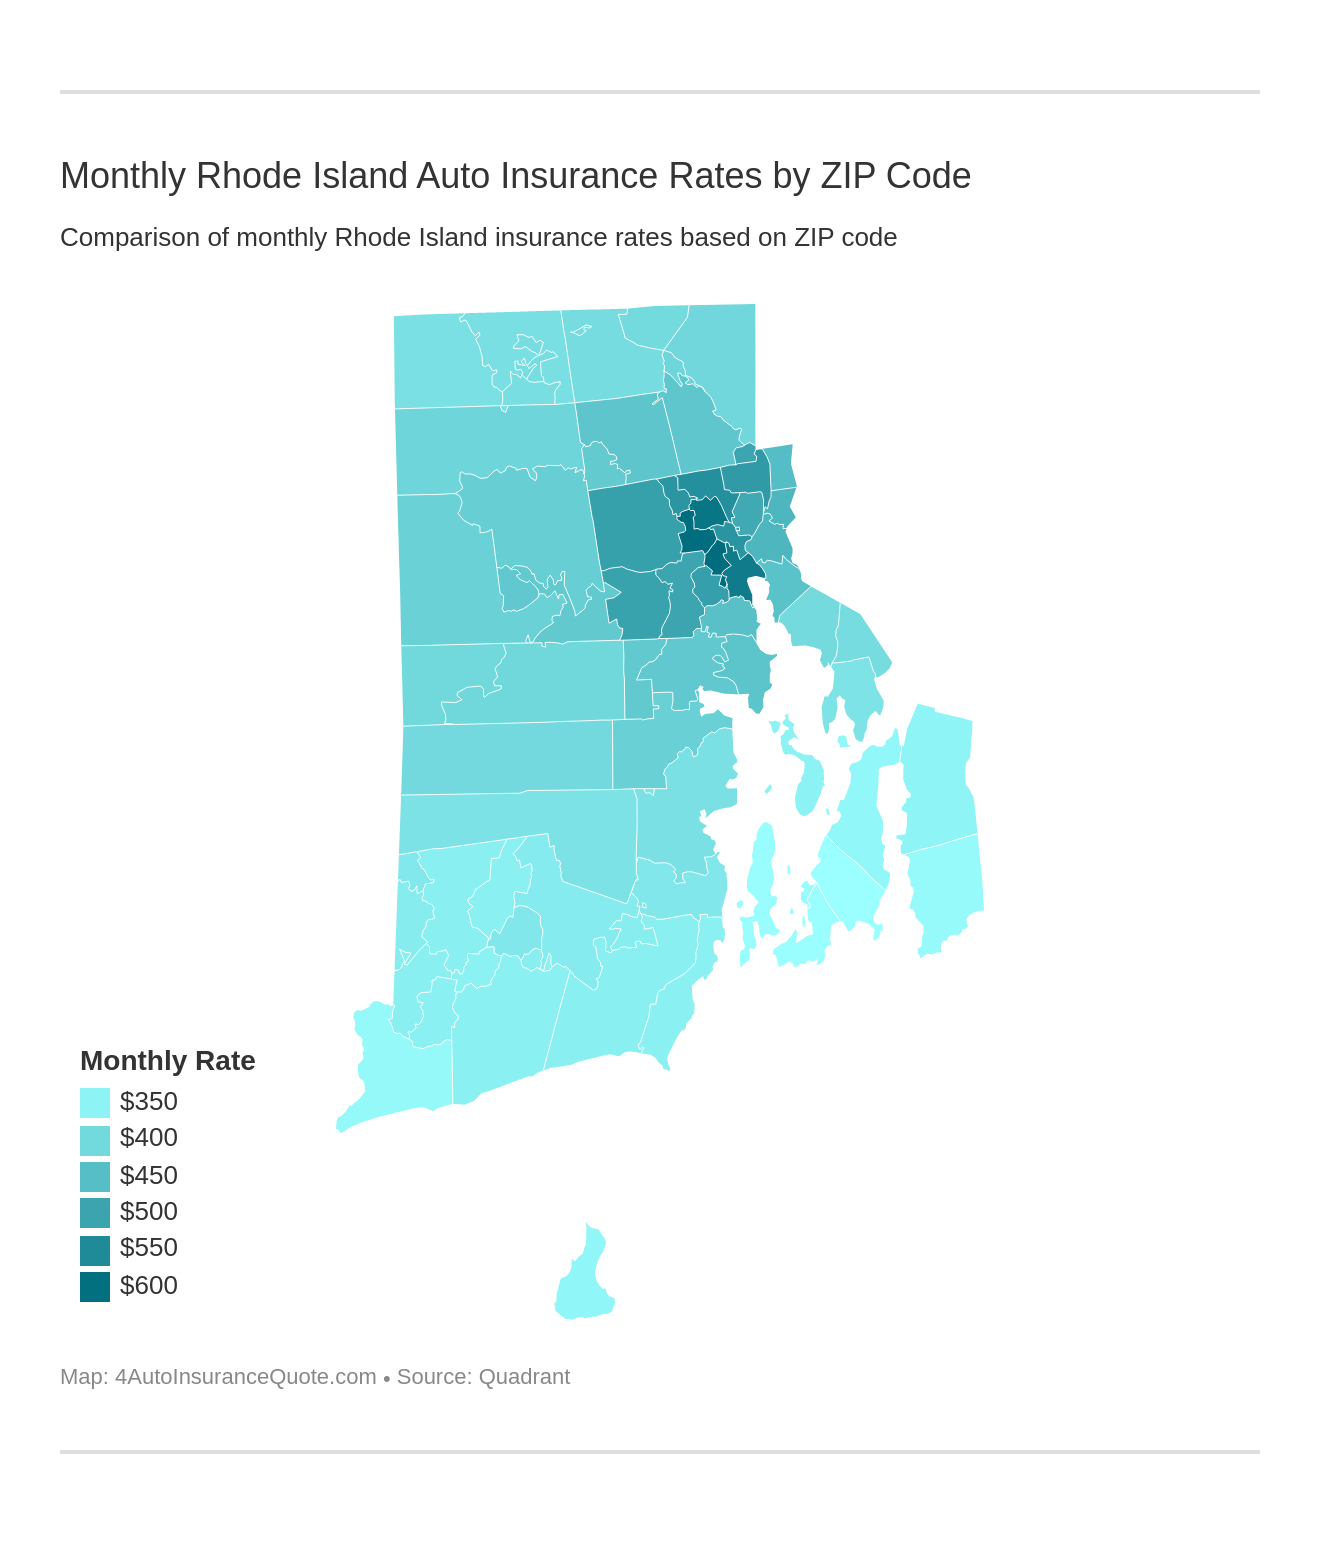 Monthly Rhode Island Auto Insurance Rates by ZIP Code